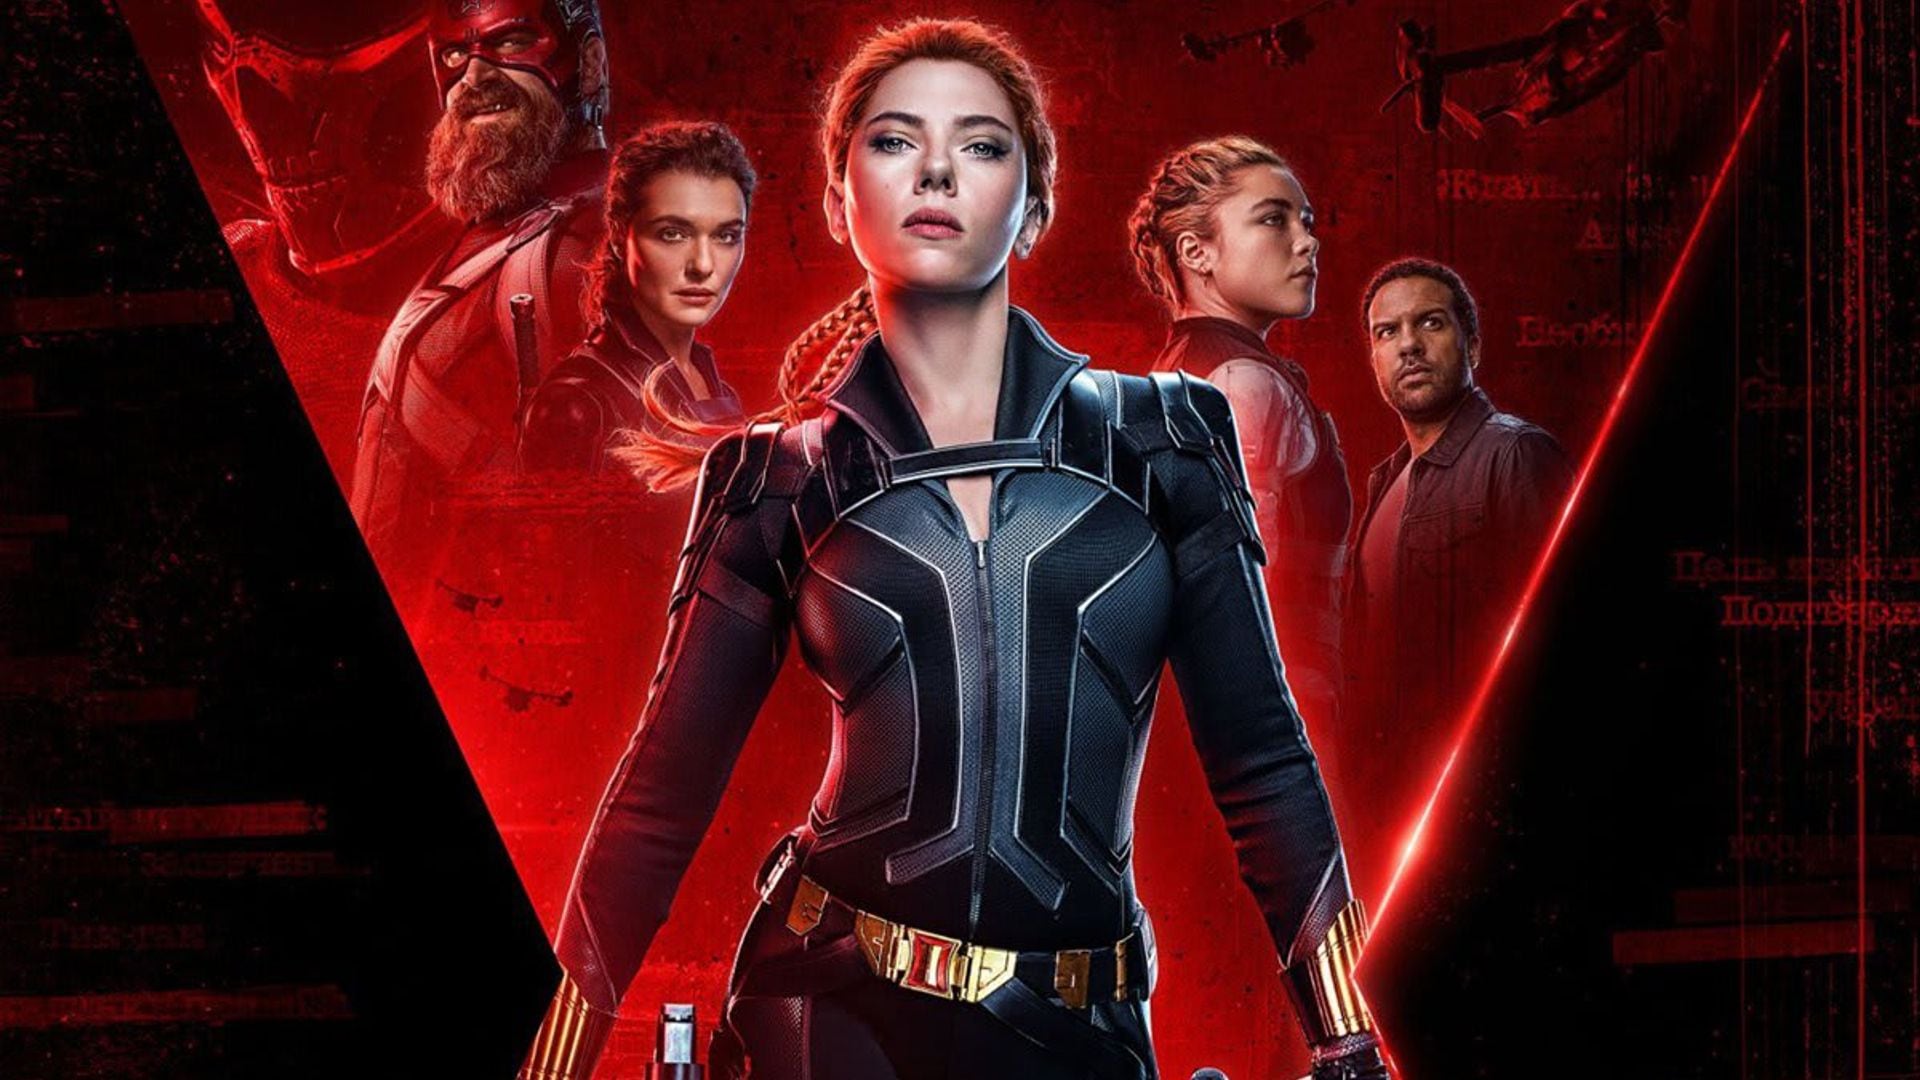 Black Widow's most iconic outfits, power, abilities, and notable enemies